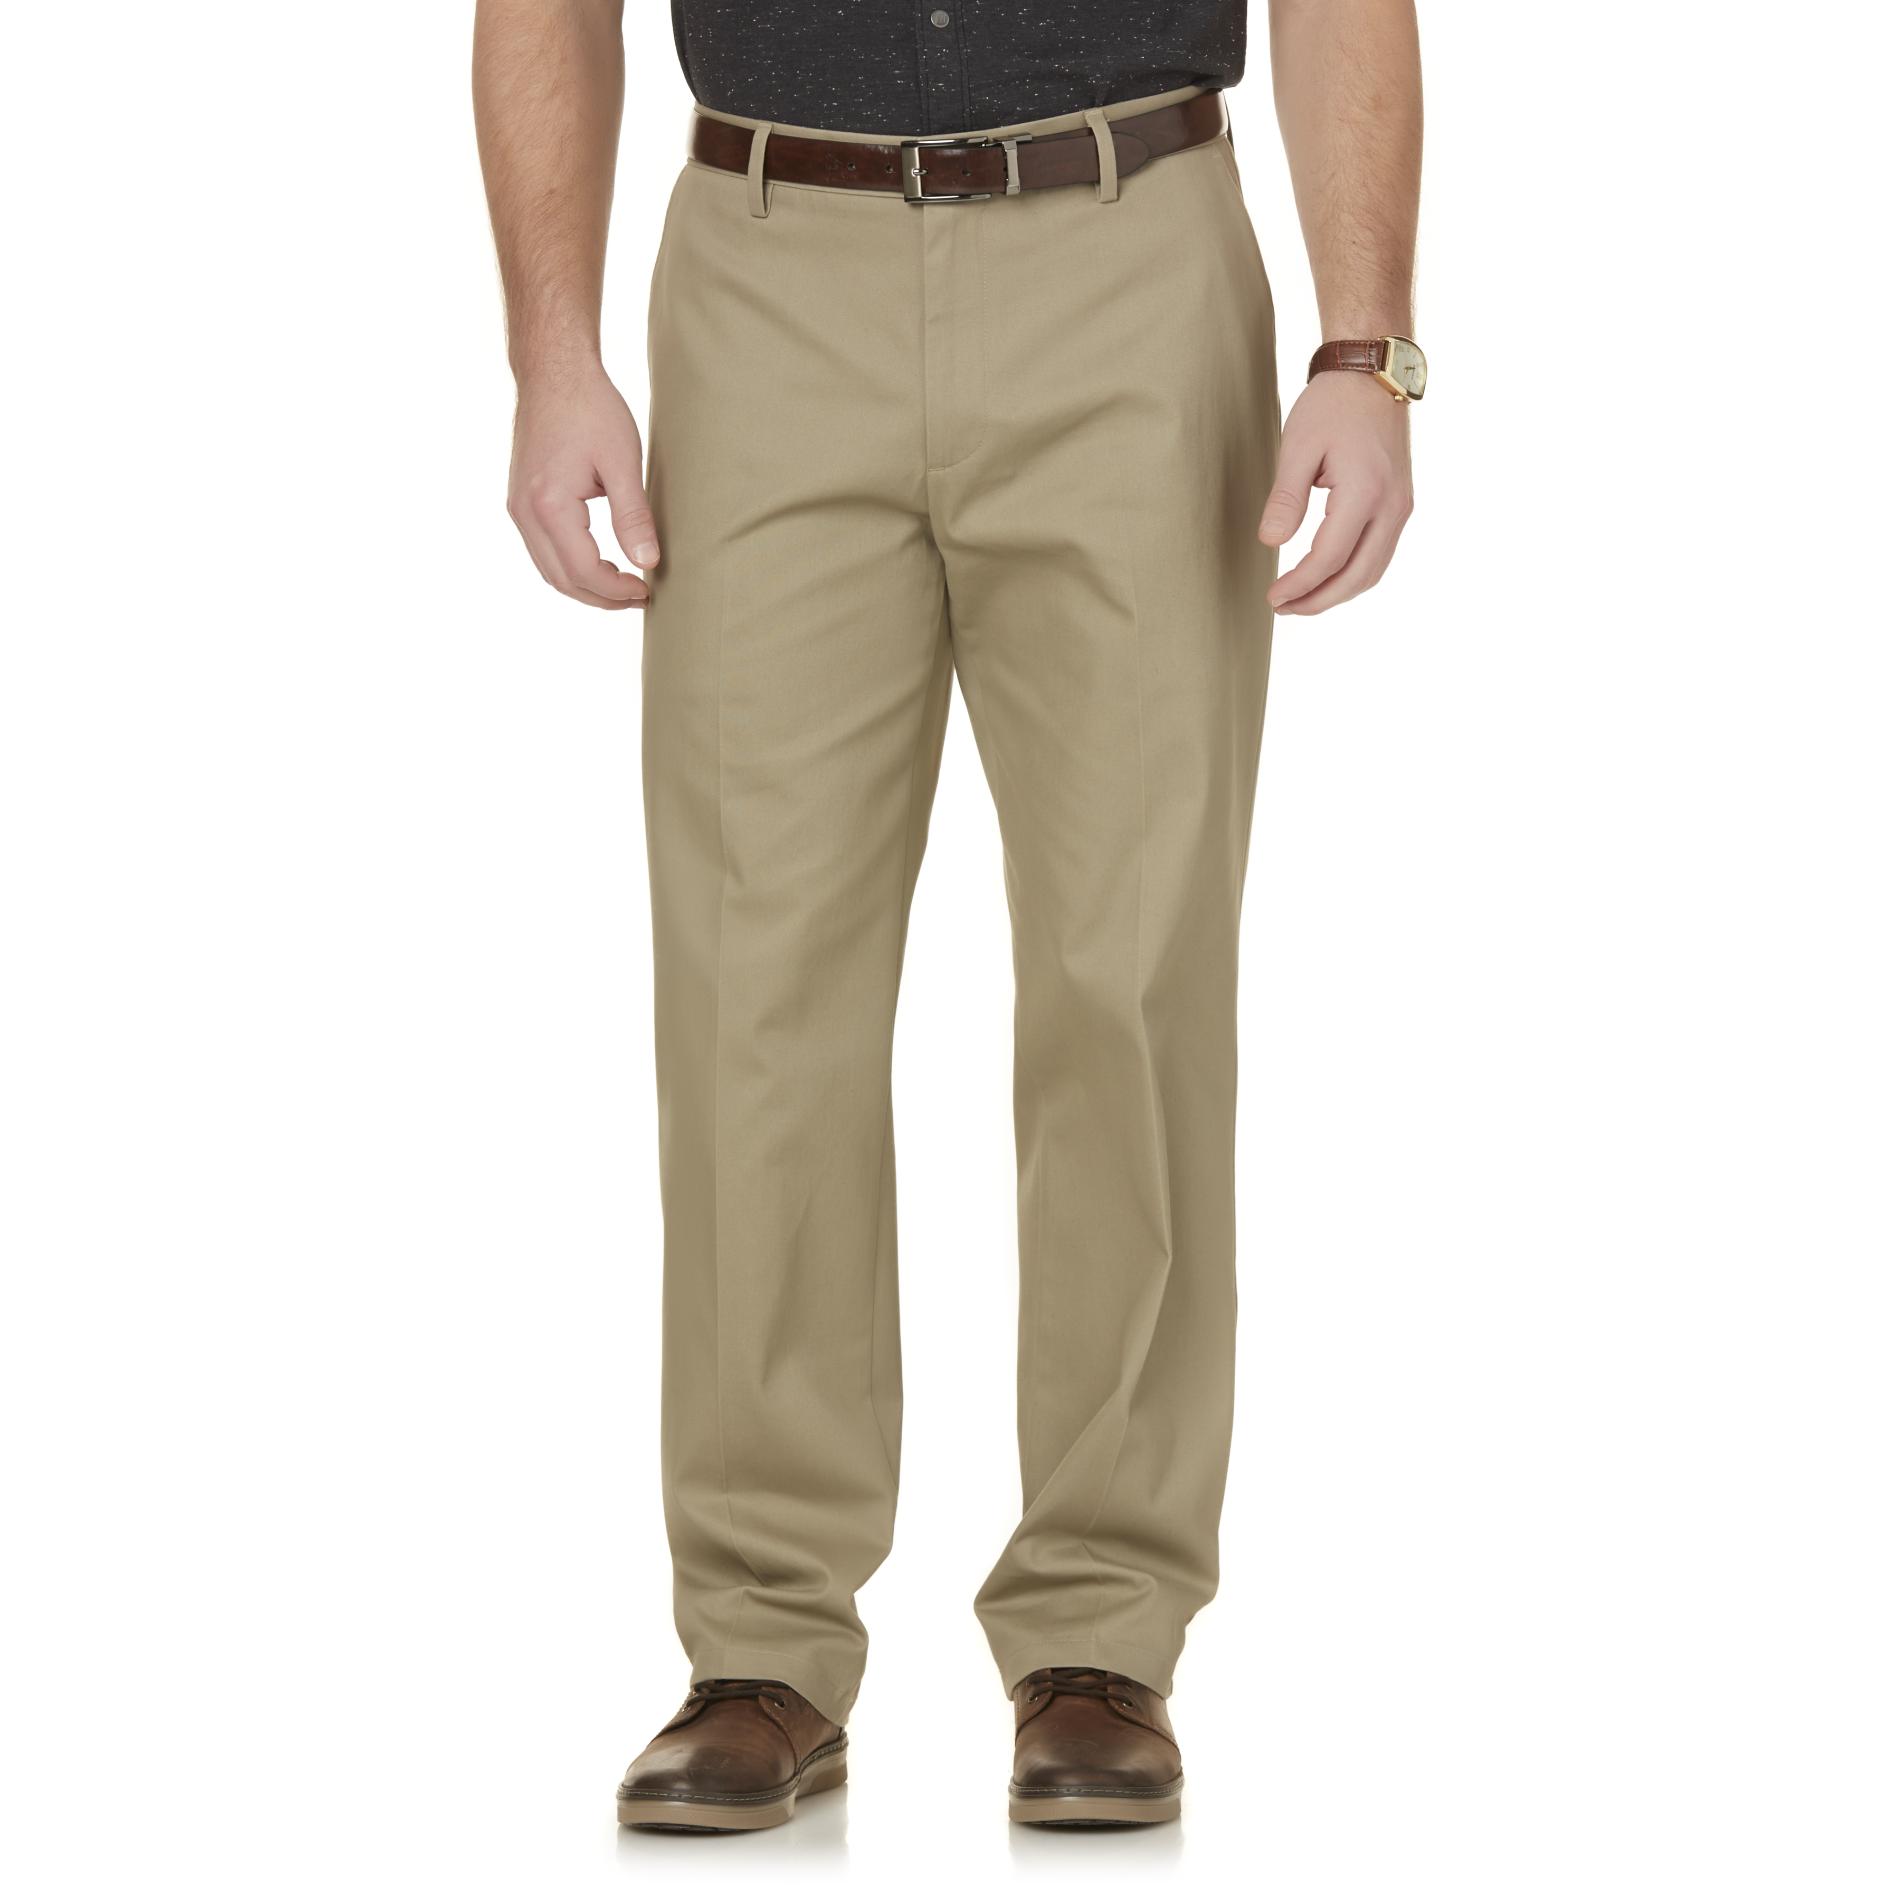 Dockers Men's Relaxed Fit Pants - Sears